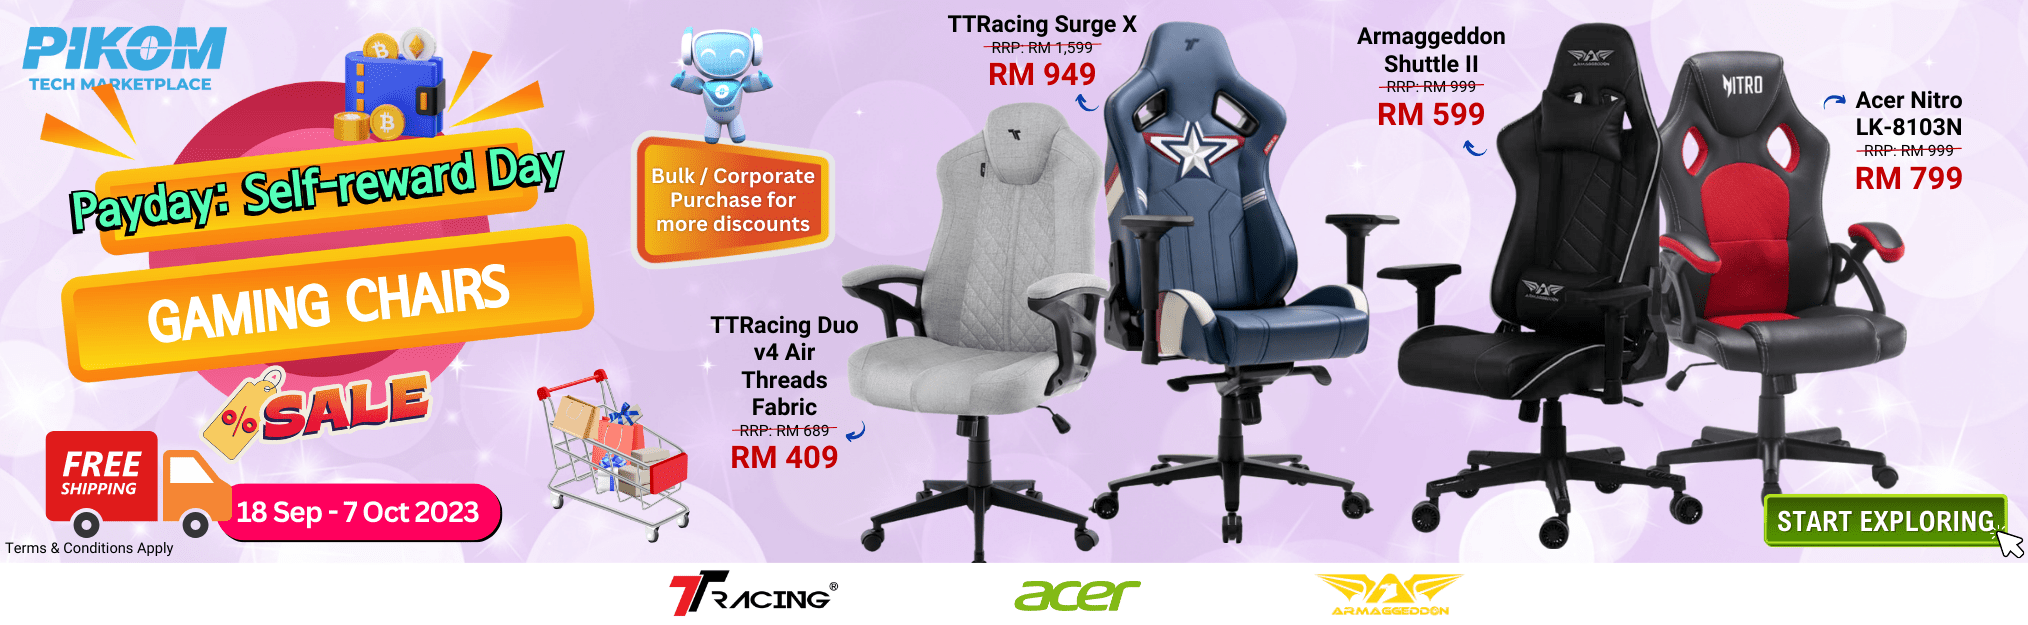 Payday_Gaming_Chairs_V2_2028x625_Resize.png